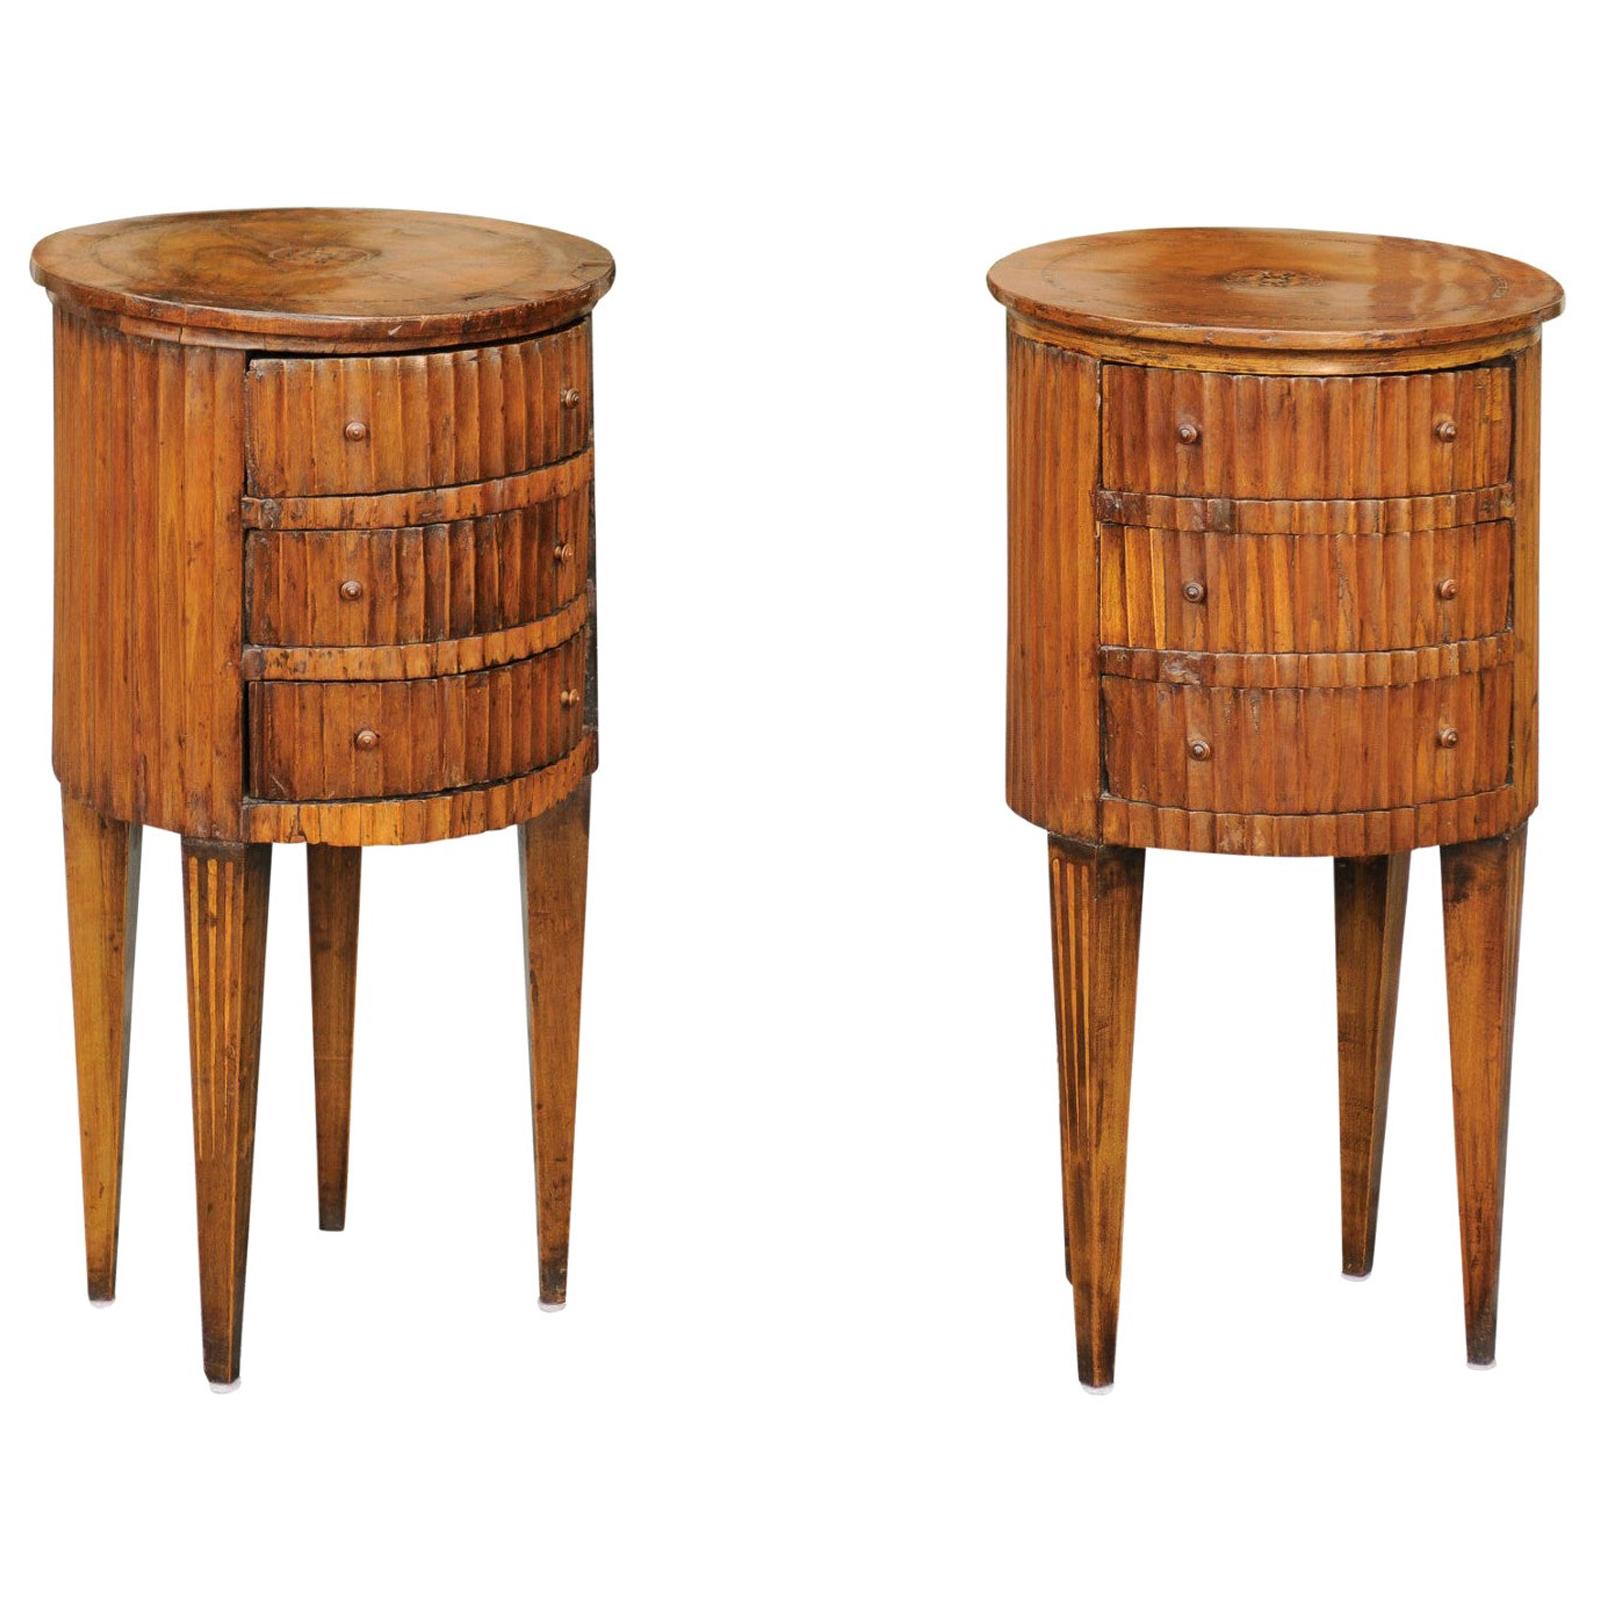 Pair of Italian 1820s Neoclassical Fluted End Tables with Marquetry Decor